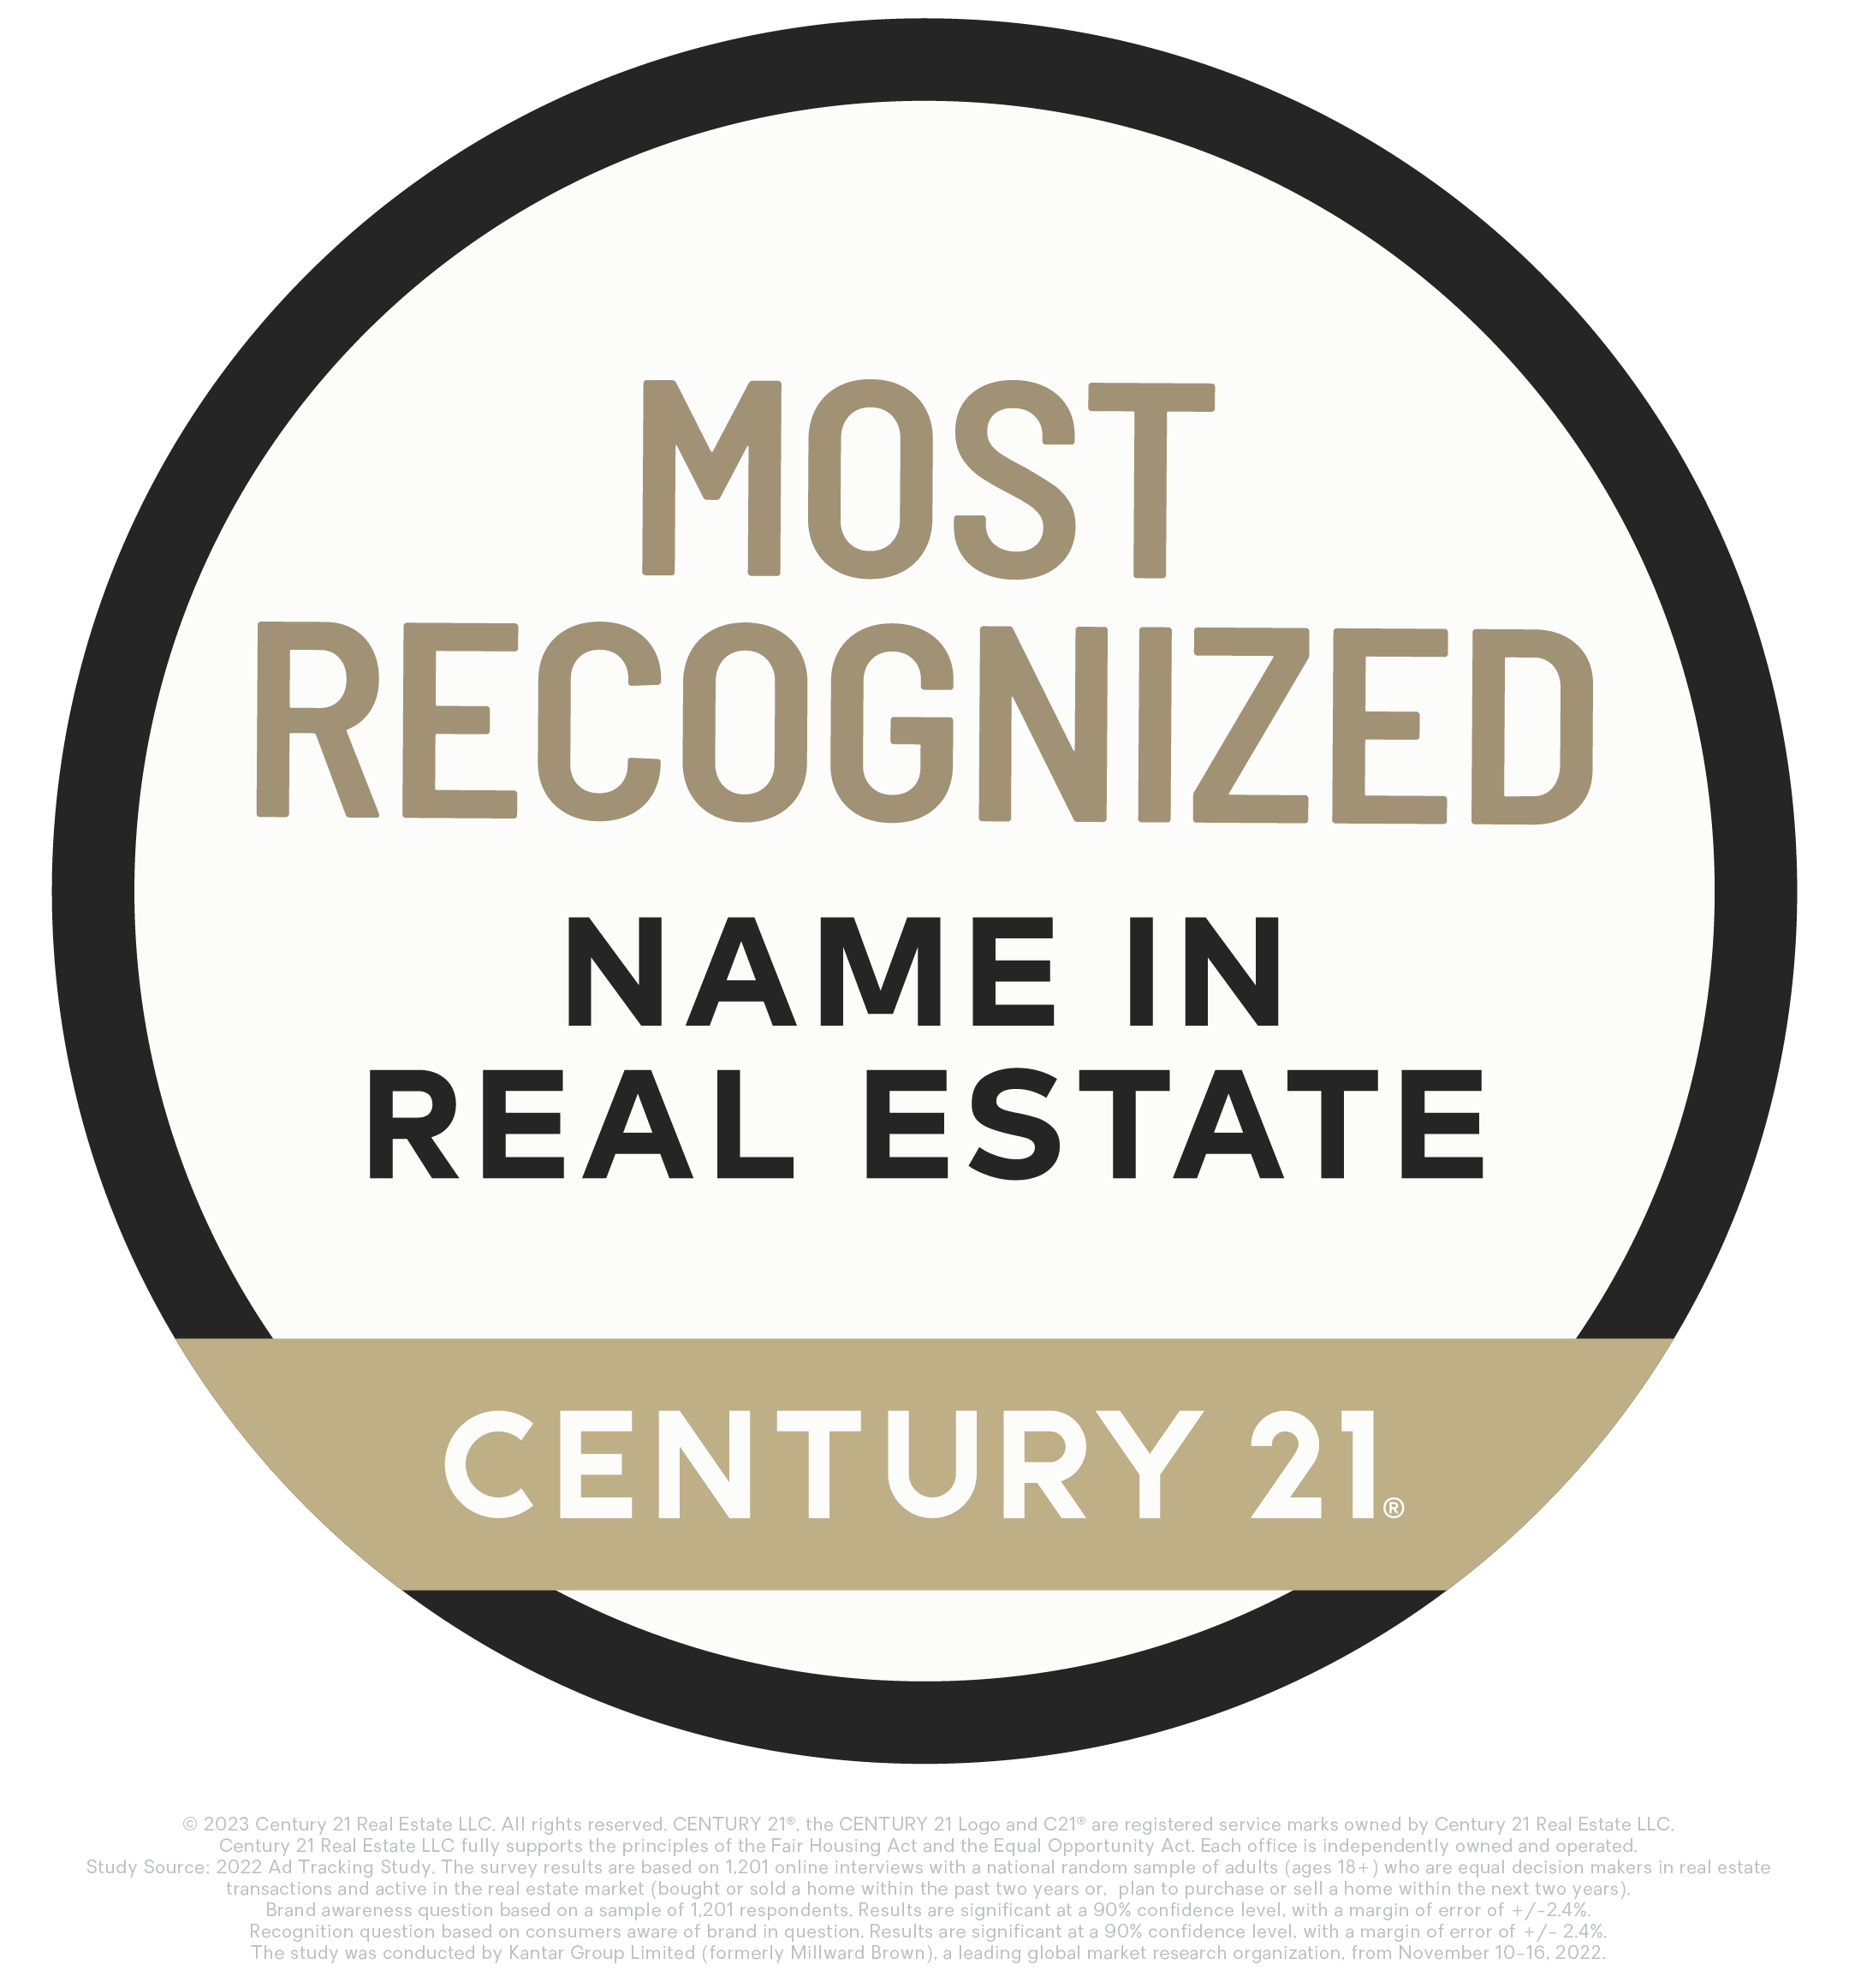 c21 most recognized name in real estate